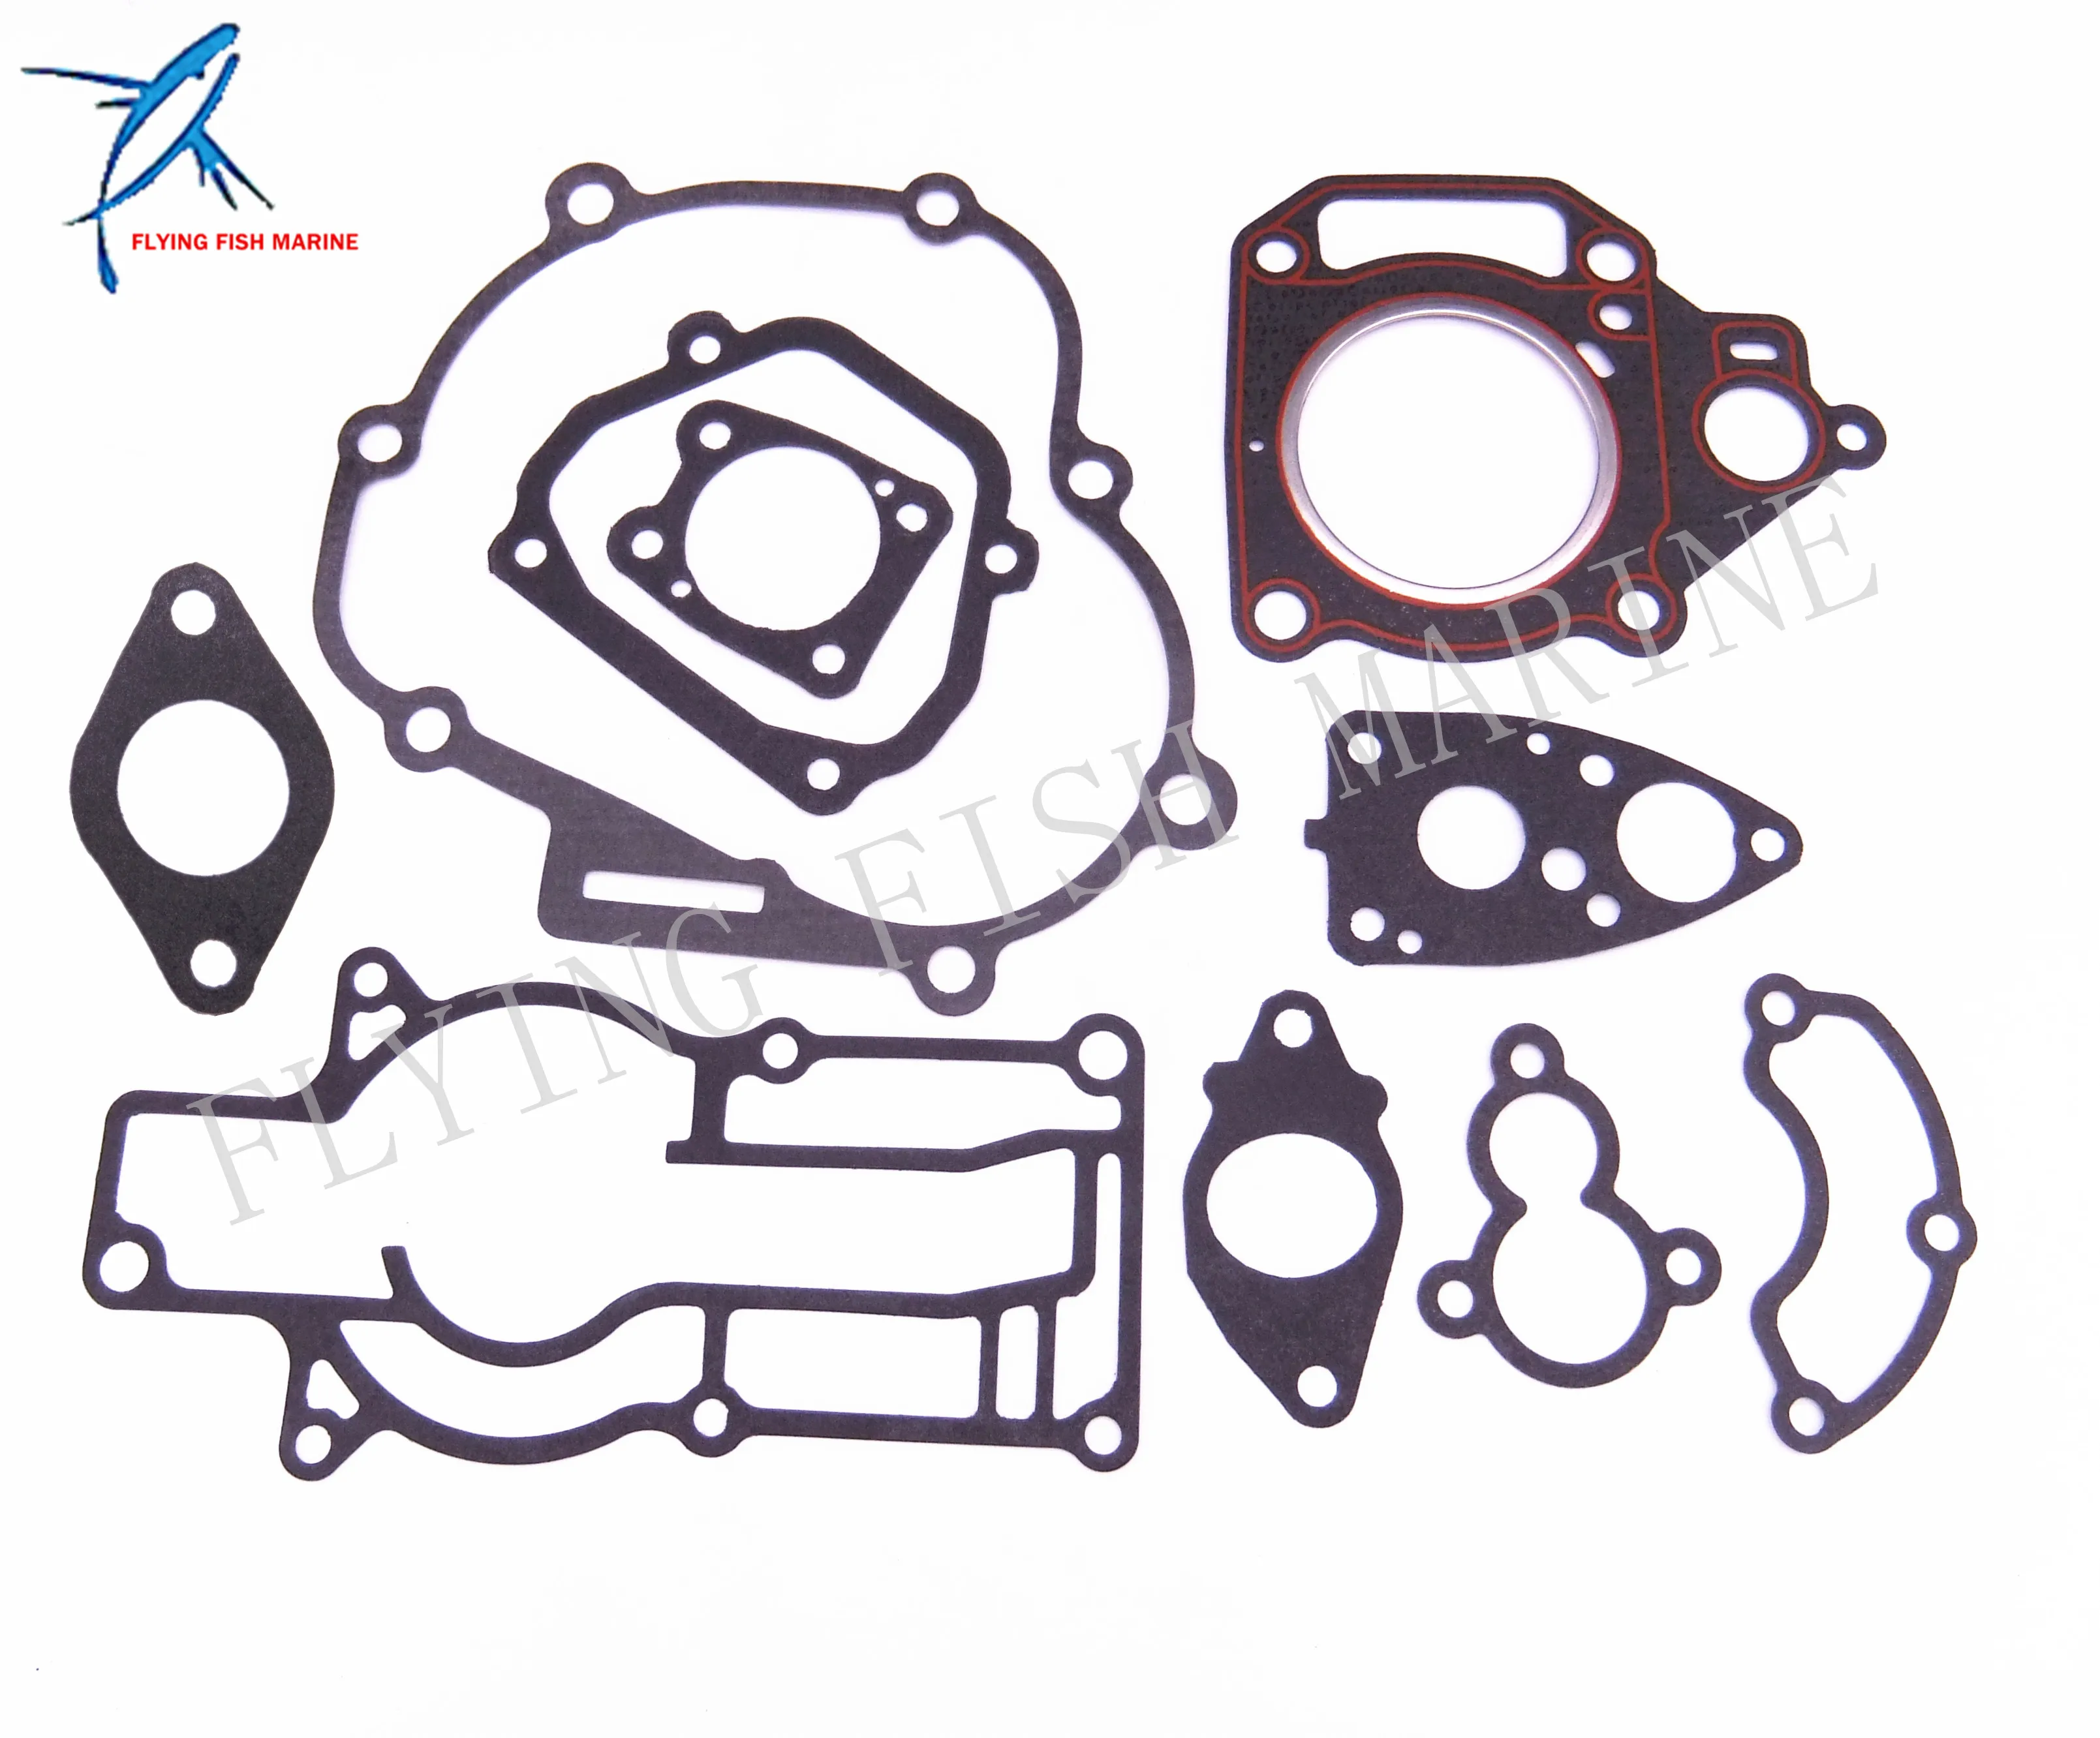 Complete Power Head Seal Gasket Kit for Yamaha F4 4HP 4-stroke Boat Outboard Motor